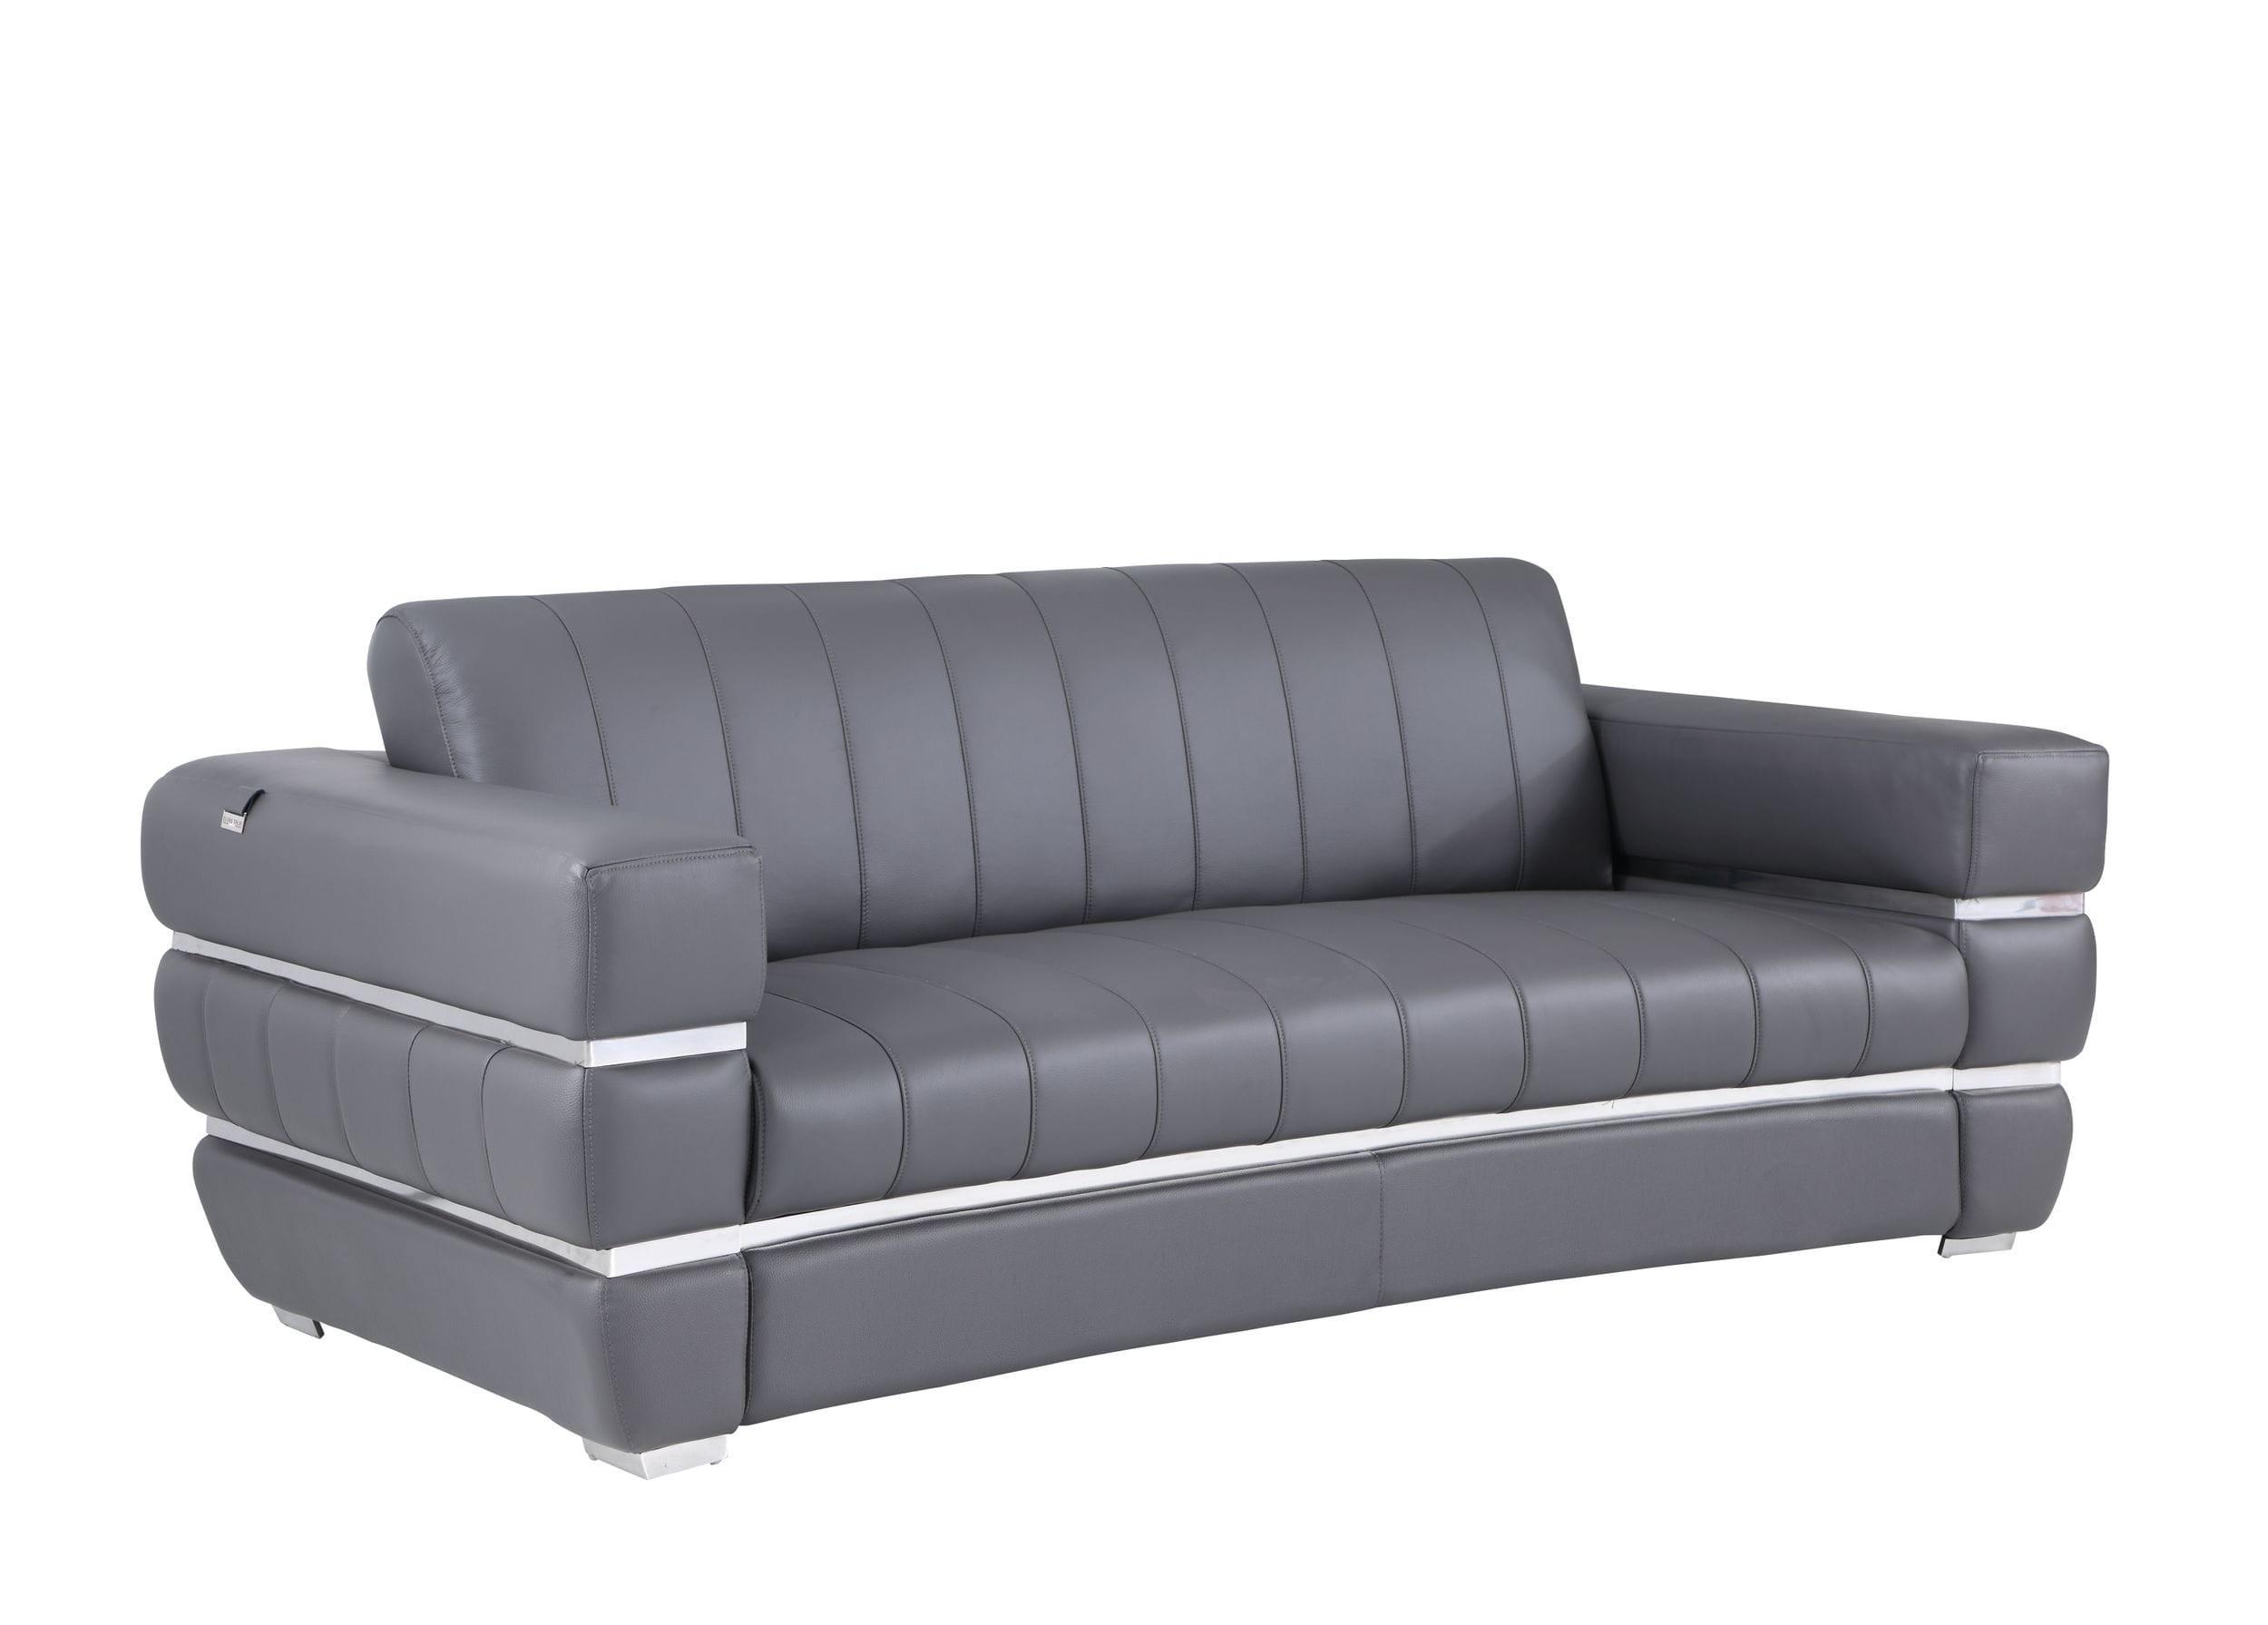 Contemporary Sofa 904 904-DK_GRAY-S in Gray Leather